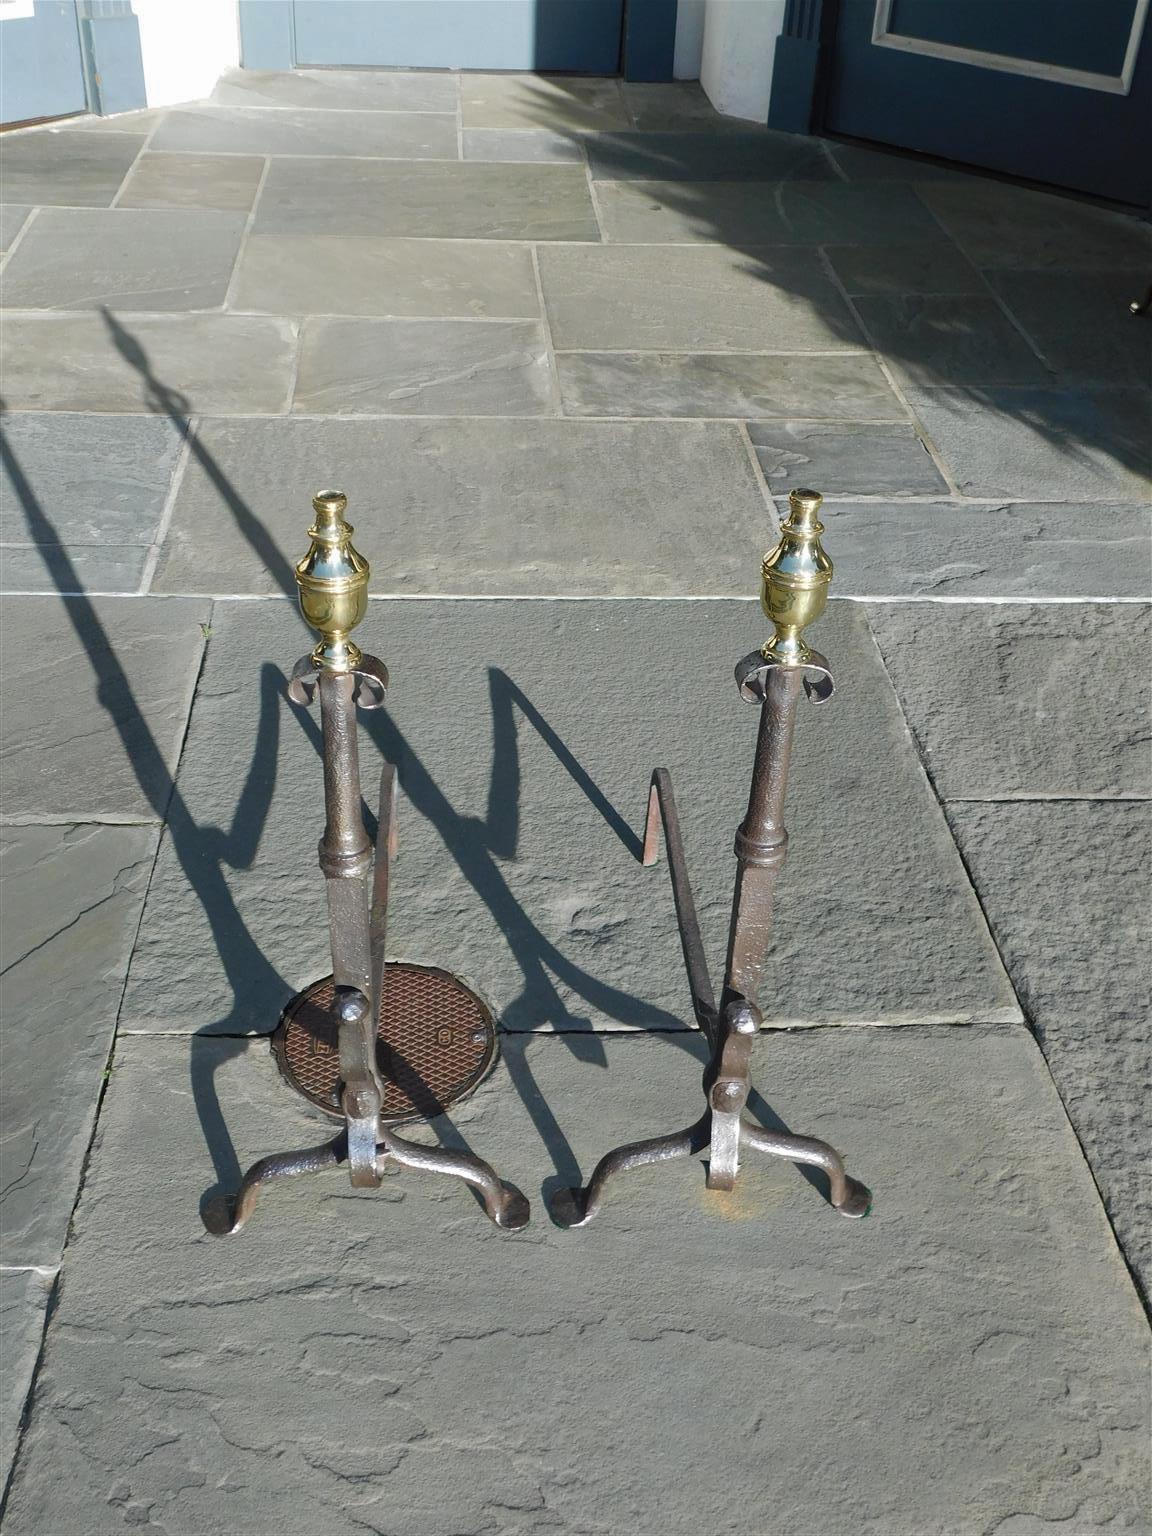 Pair of American wrought iron and brass andirons with flanking urn finials, decorative scroll work, squared circular plinths with spit hooks, matching scrolled legs, and resting on the original penny feet. Late 18th century. Central plinth columns